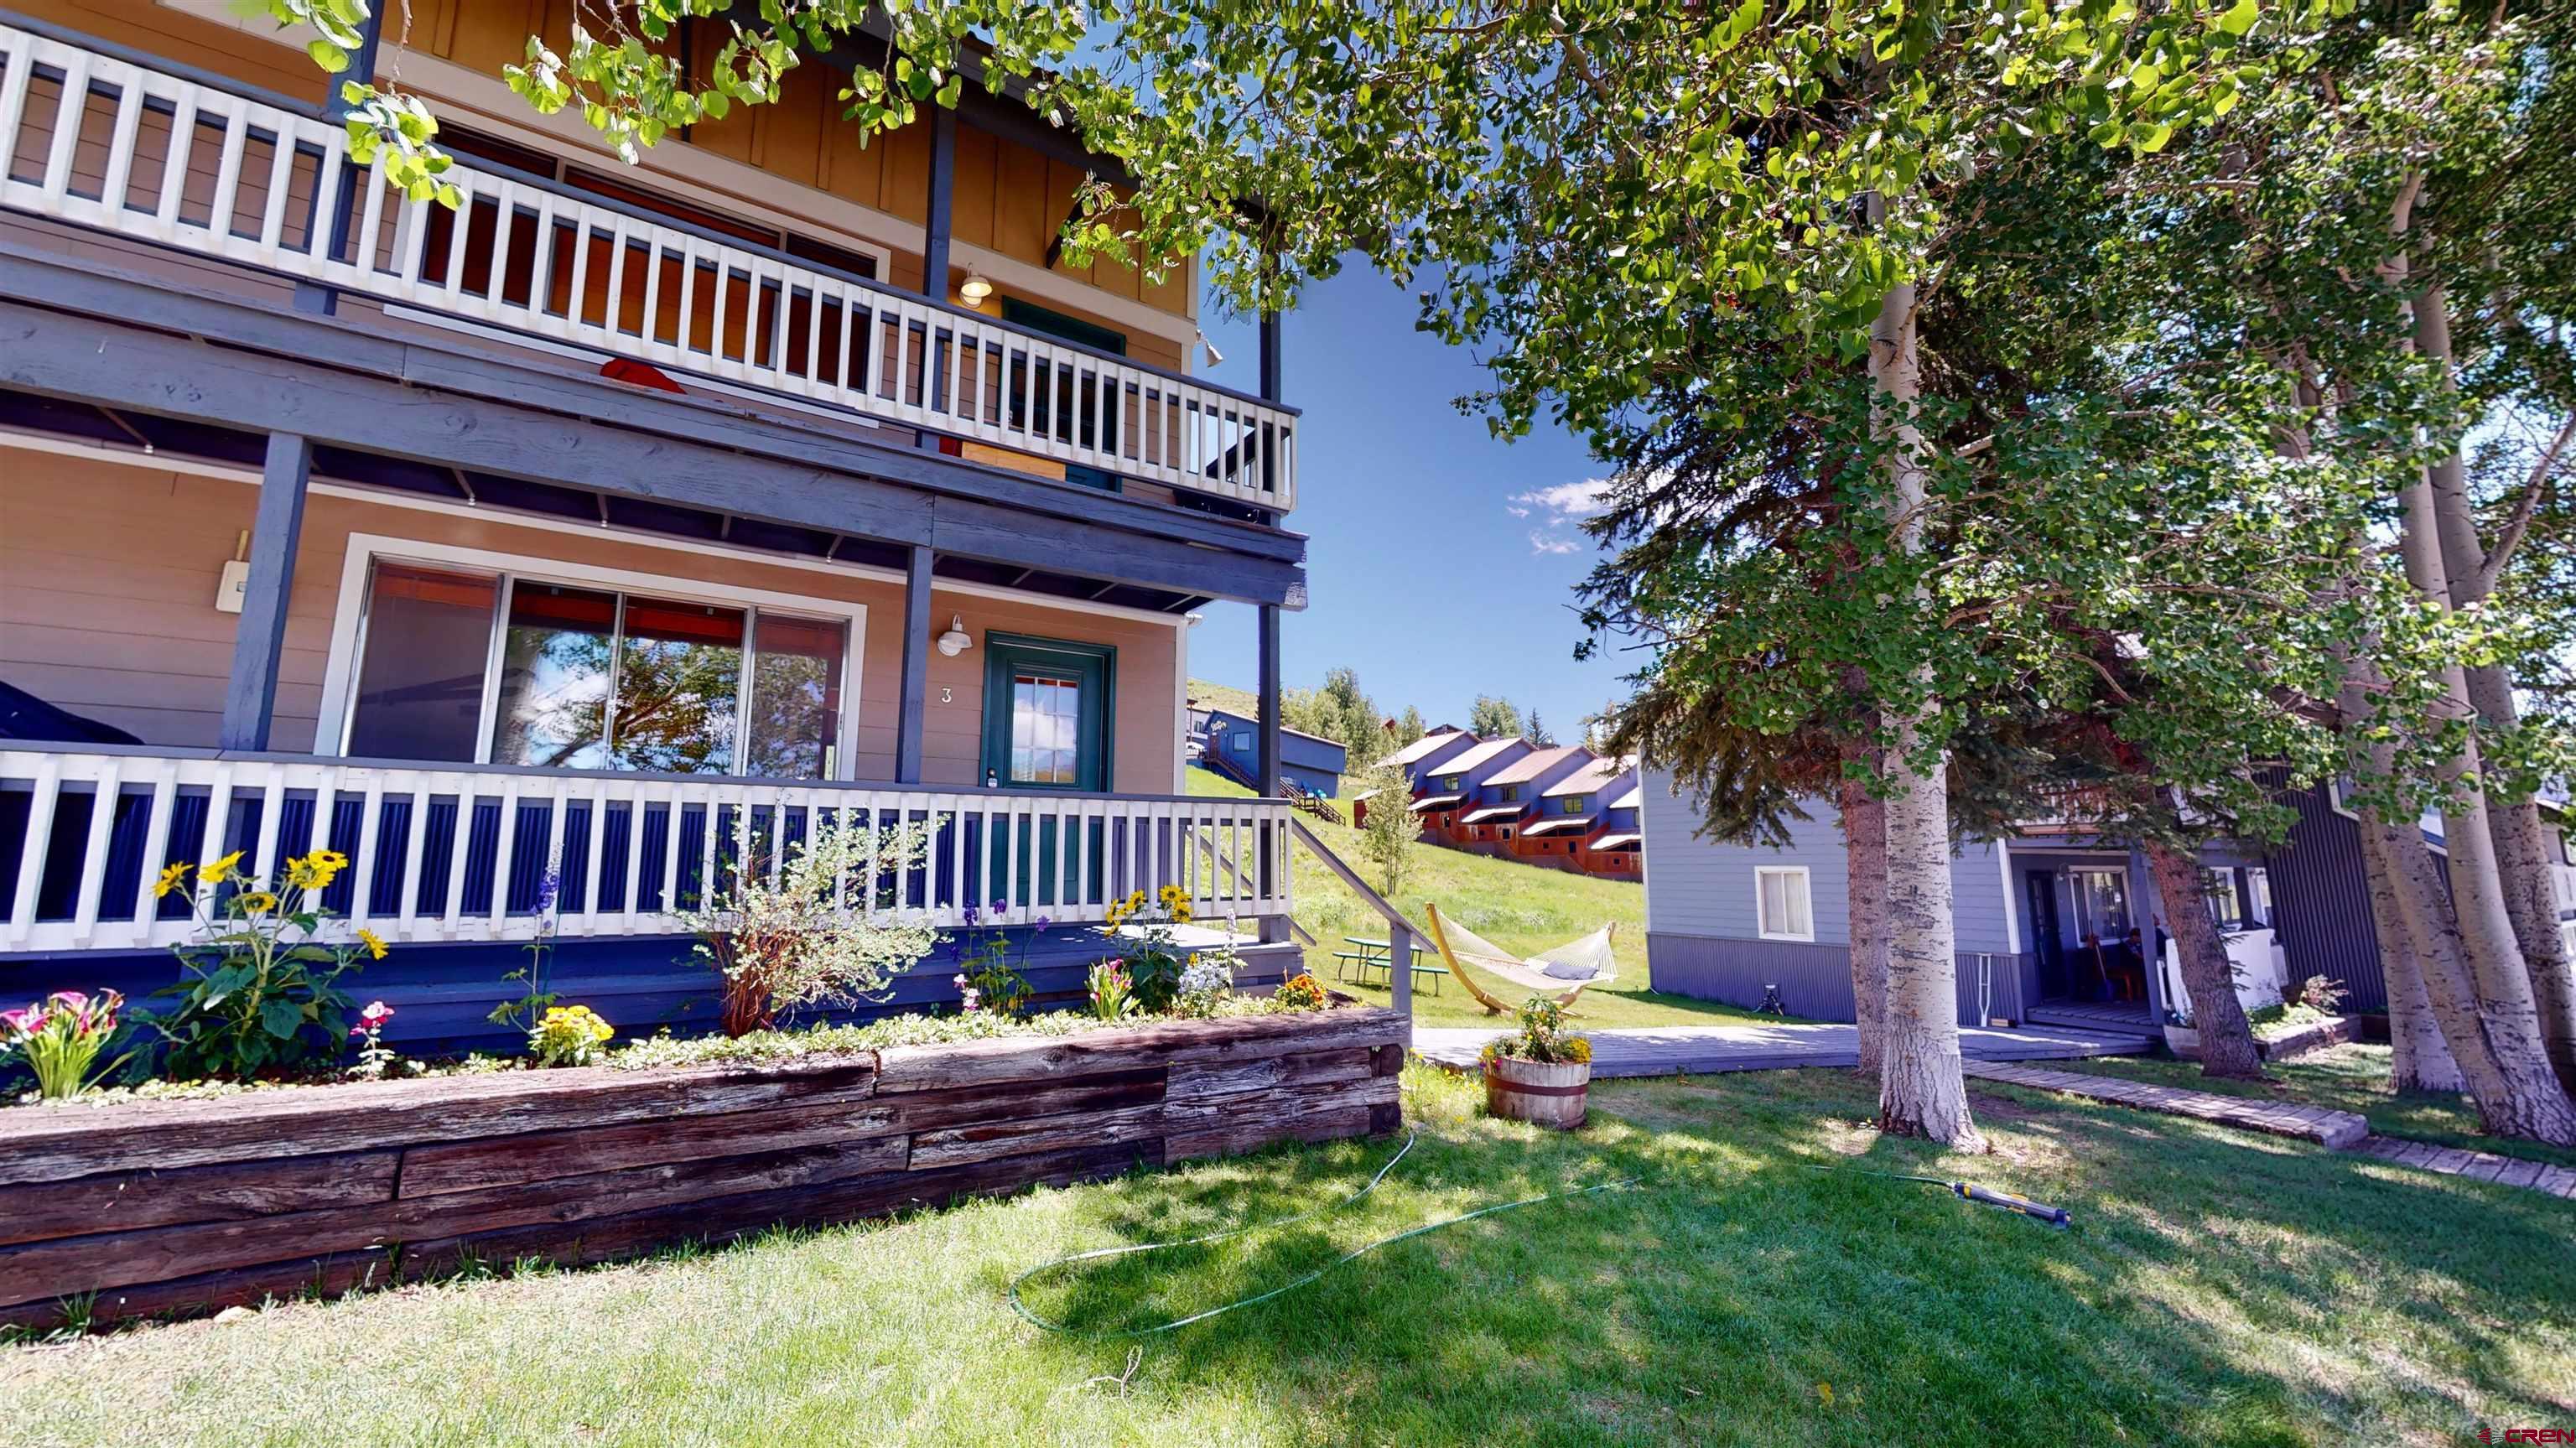 18 Crystal Road, Mt. Crested Butte, CO 81225